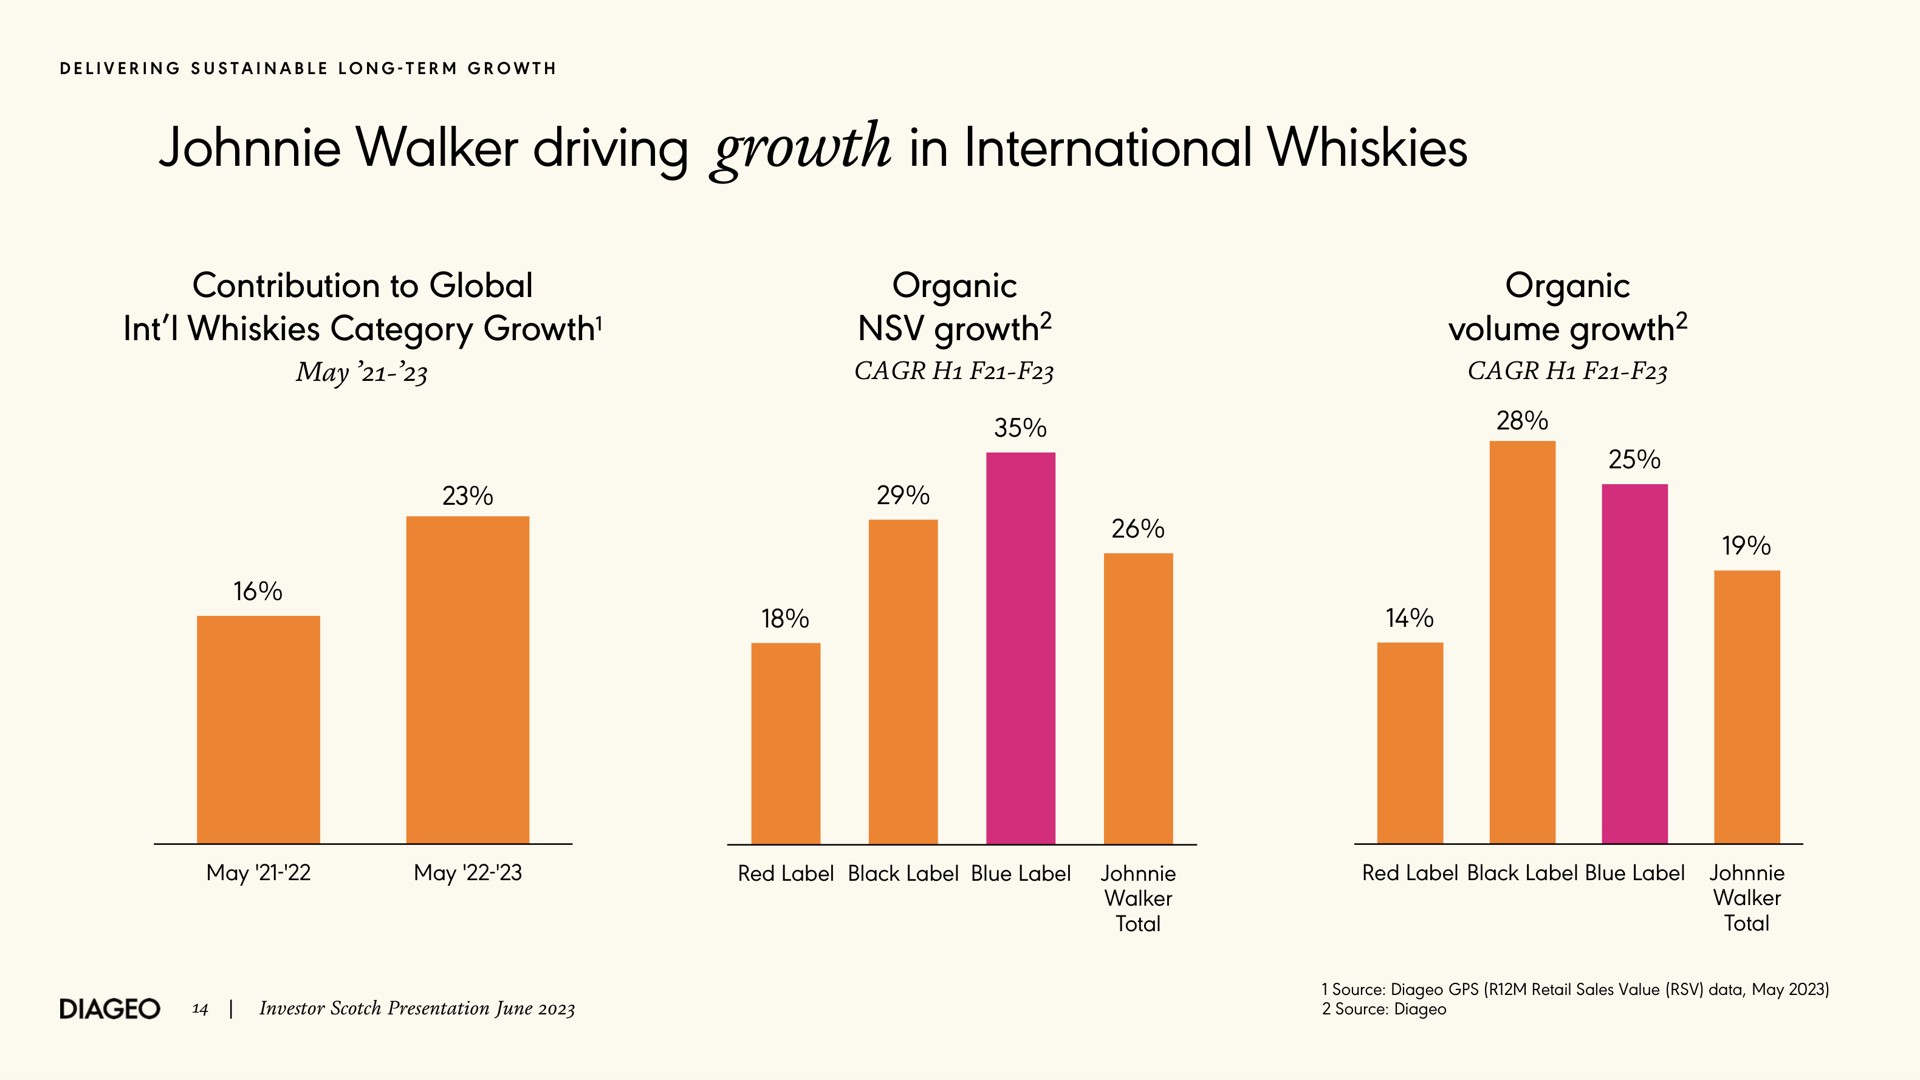 walker driving growth in international whiskies contribution to global whiskies category growth organic growth organic volume growth delivering sustainable long term may may may red label black label blue label total red label black label blue label total investor scotch presentation june source retail sales value data may source | Diageo